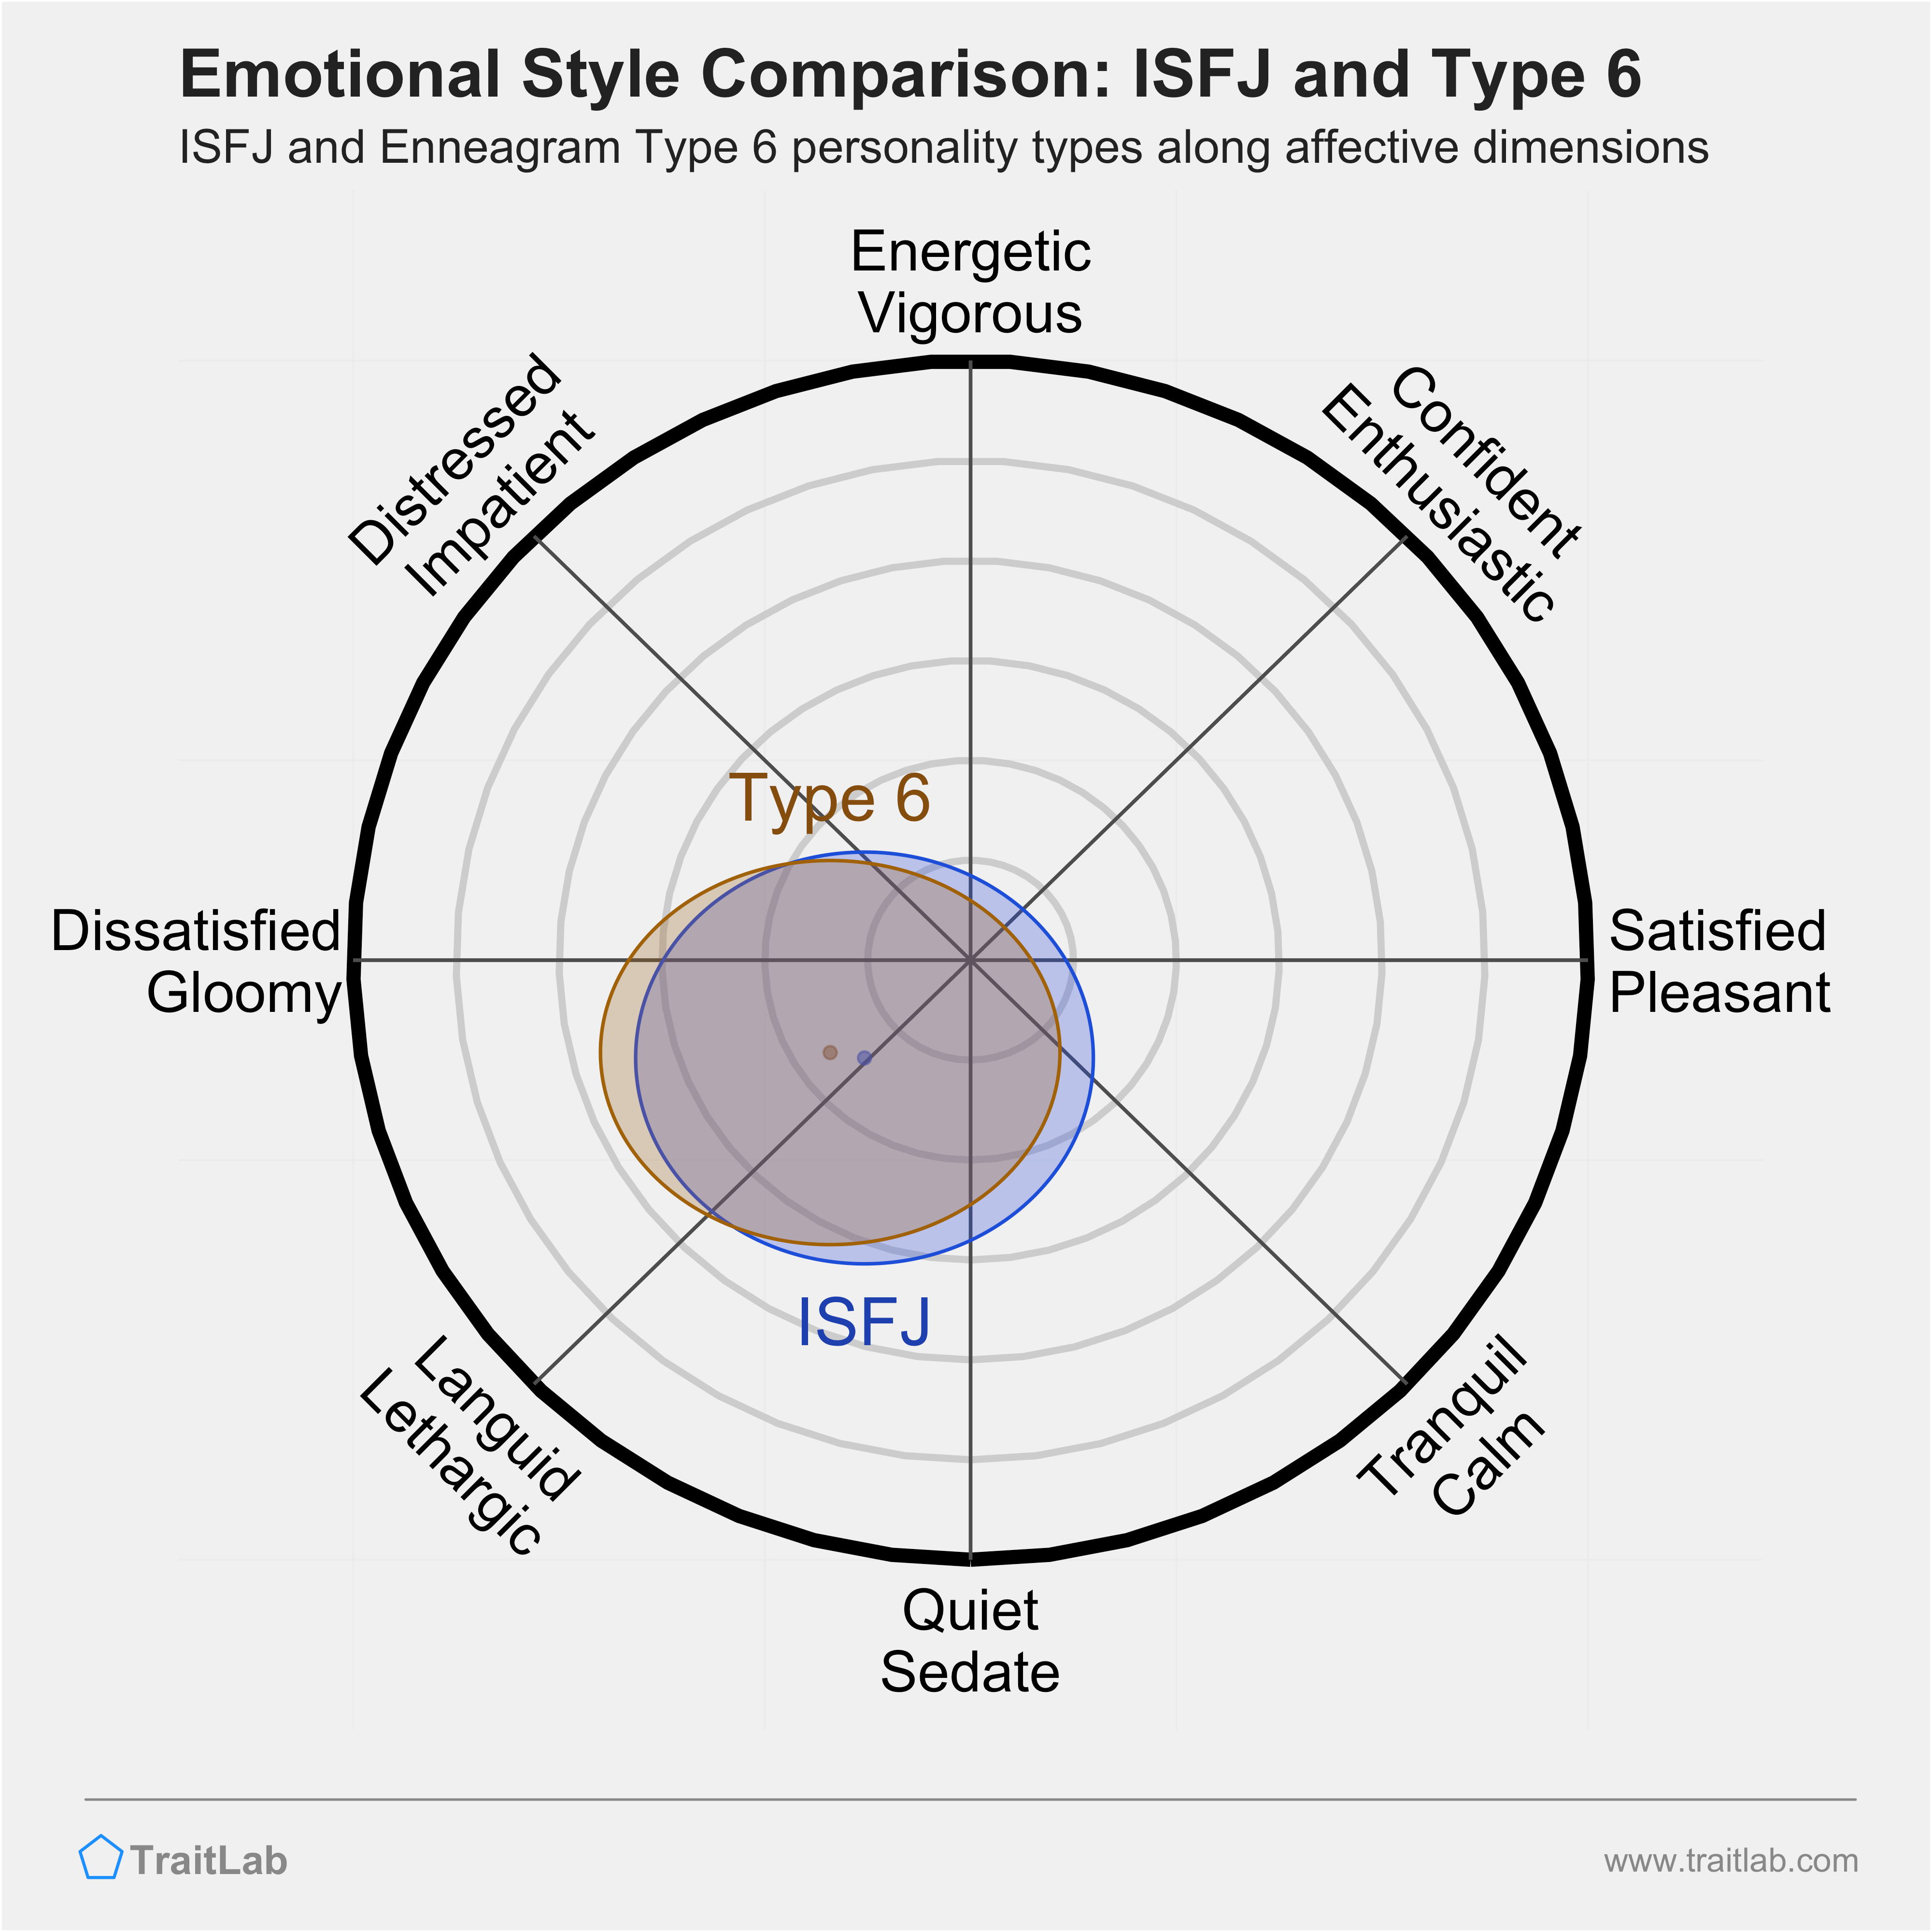 ISFJ and Type 6 comparison across emotional (affective) dimensions